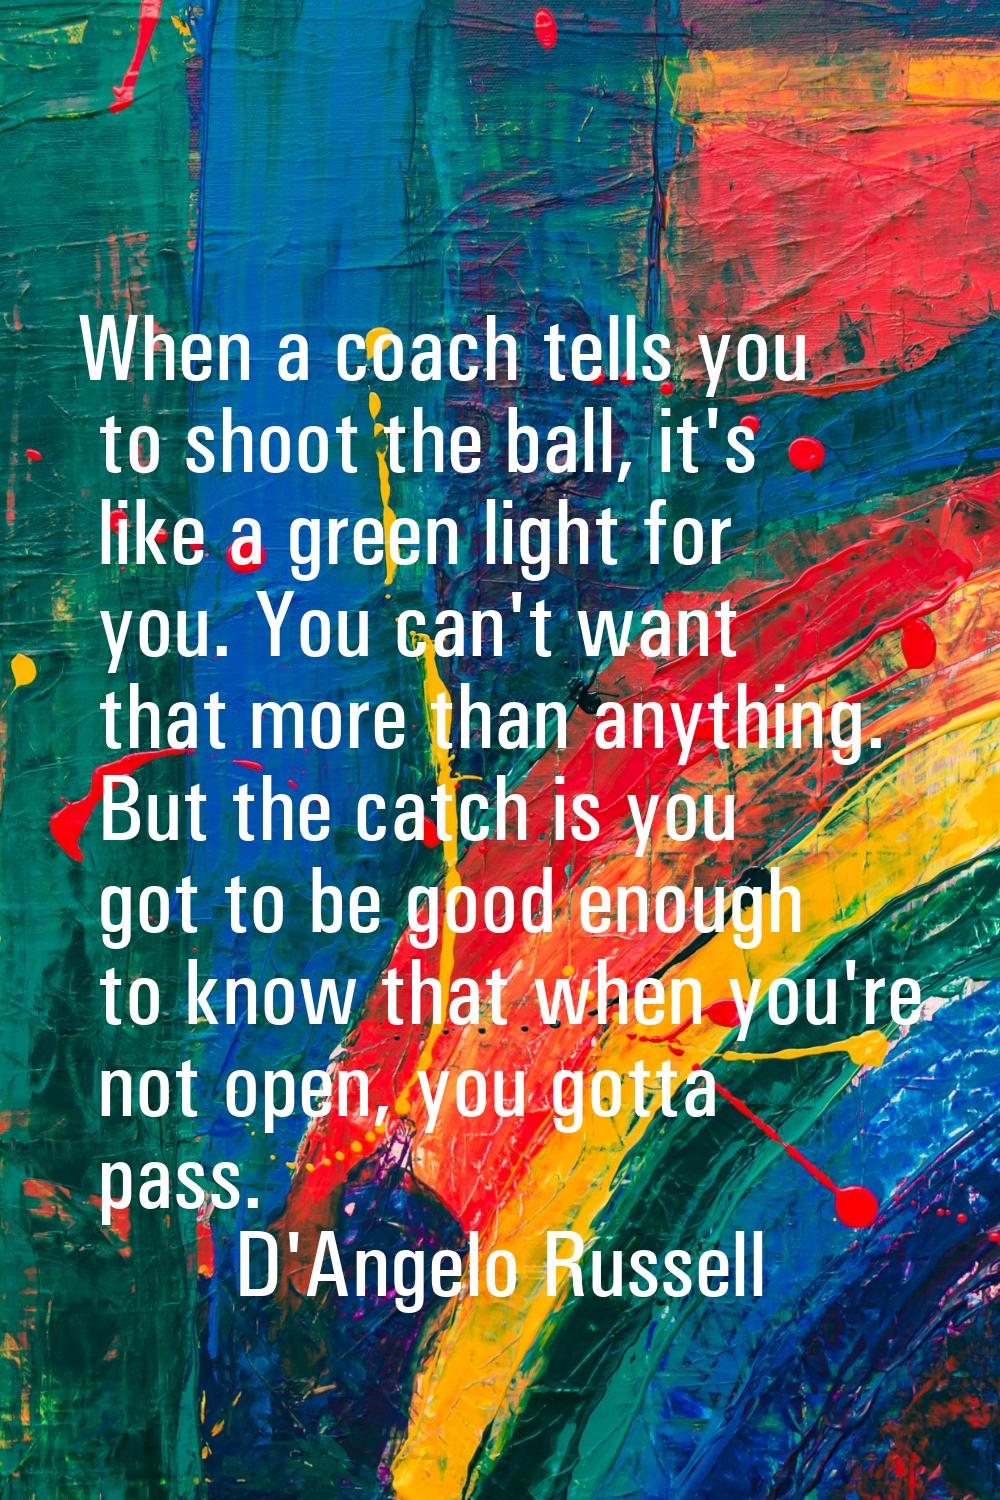 When a coach tells you to shoot the ball, it's like a green light for you. You can't want that more